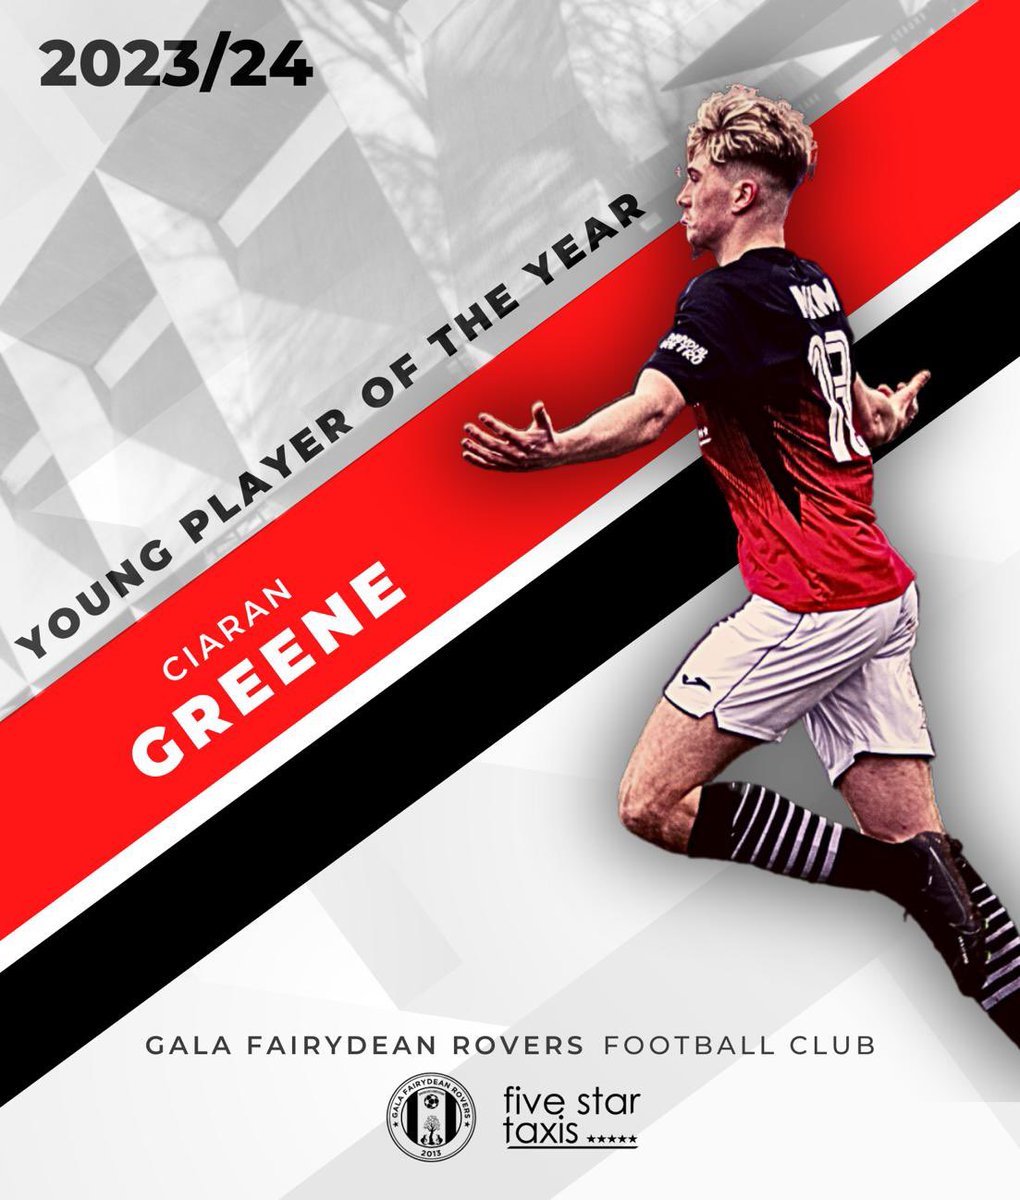 🏆 Gala Fairydean Rovers Lowland League Young Player Of The Year 😊 Ciaran Greene ❤️⚫️